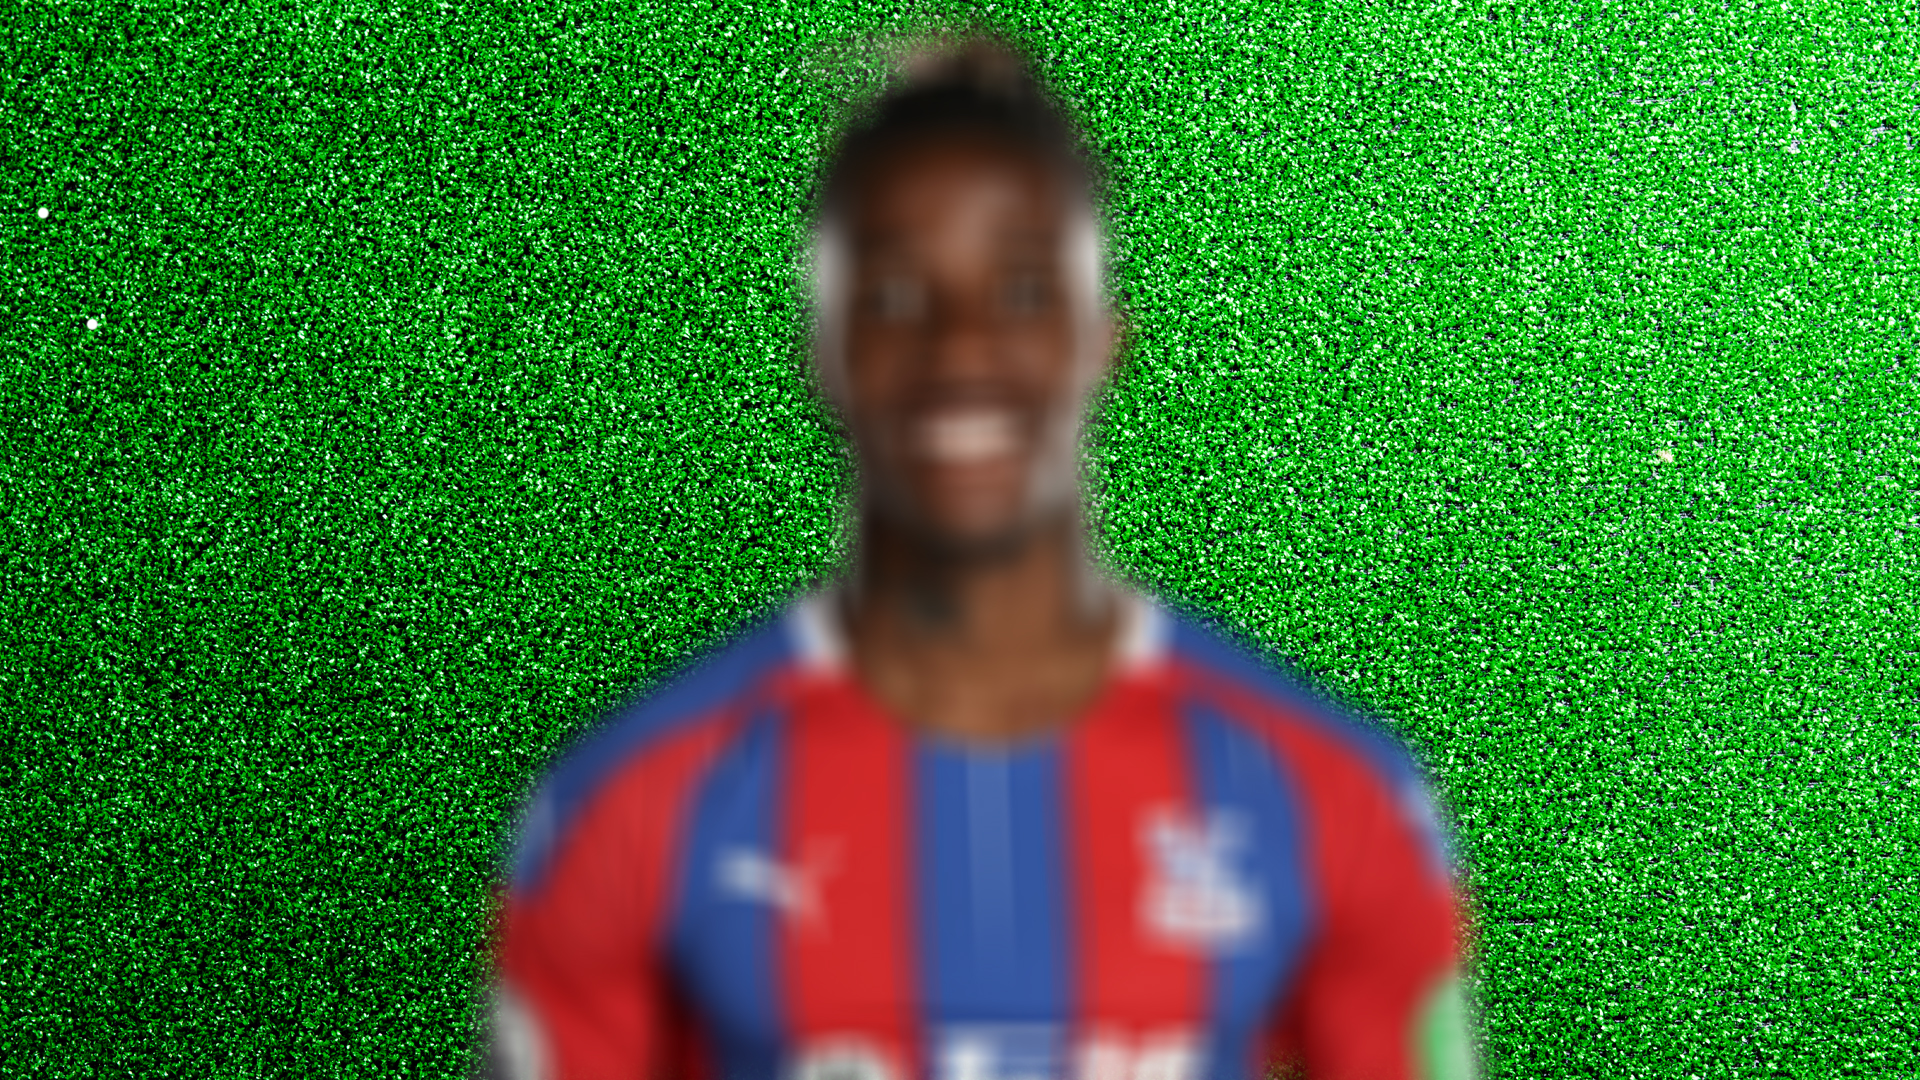 Blurred image of player 8